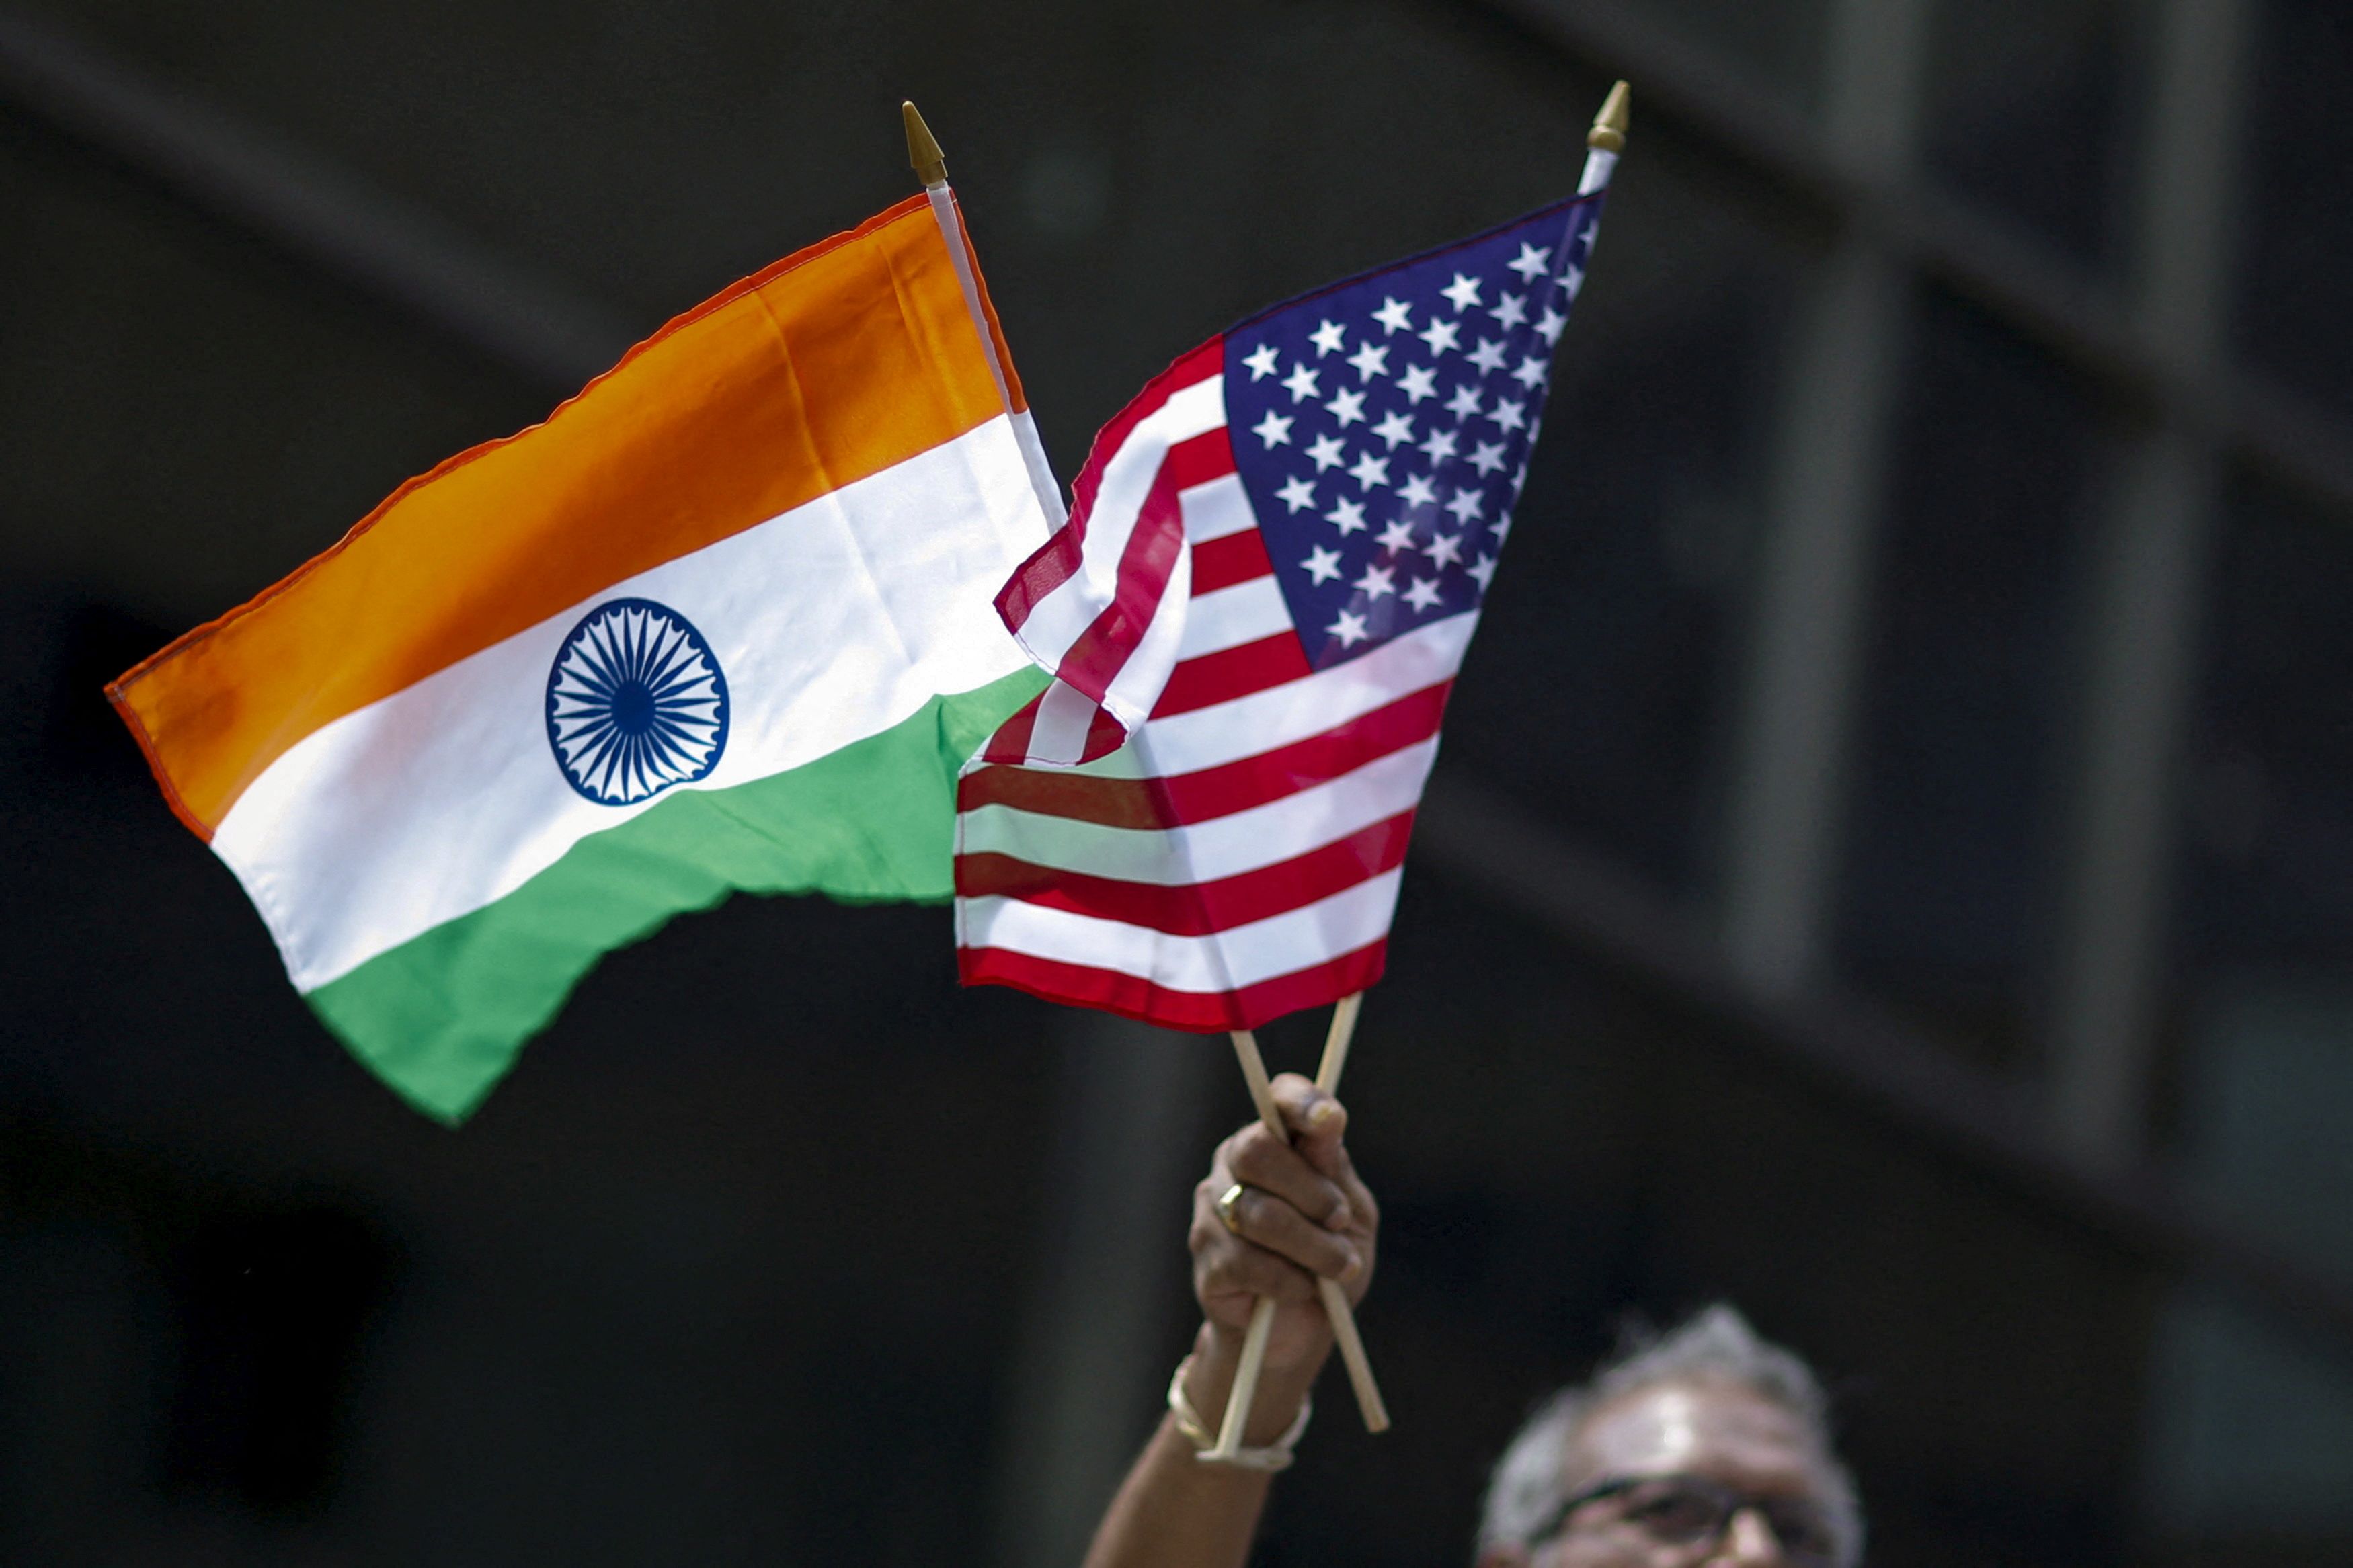 Man holds the flags while people take part in the 35th India Day Parade in New York